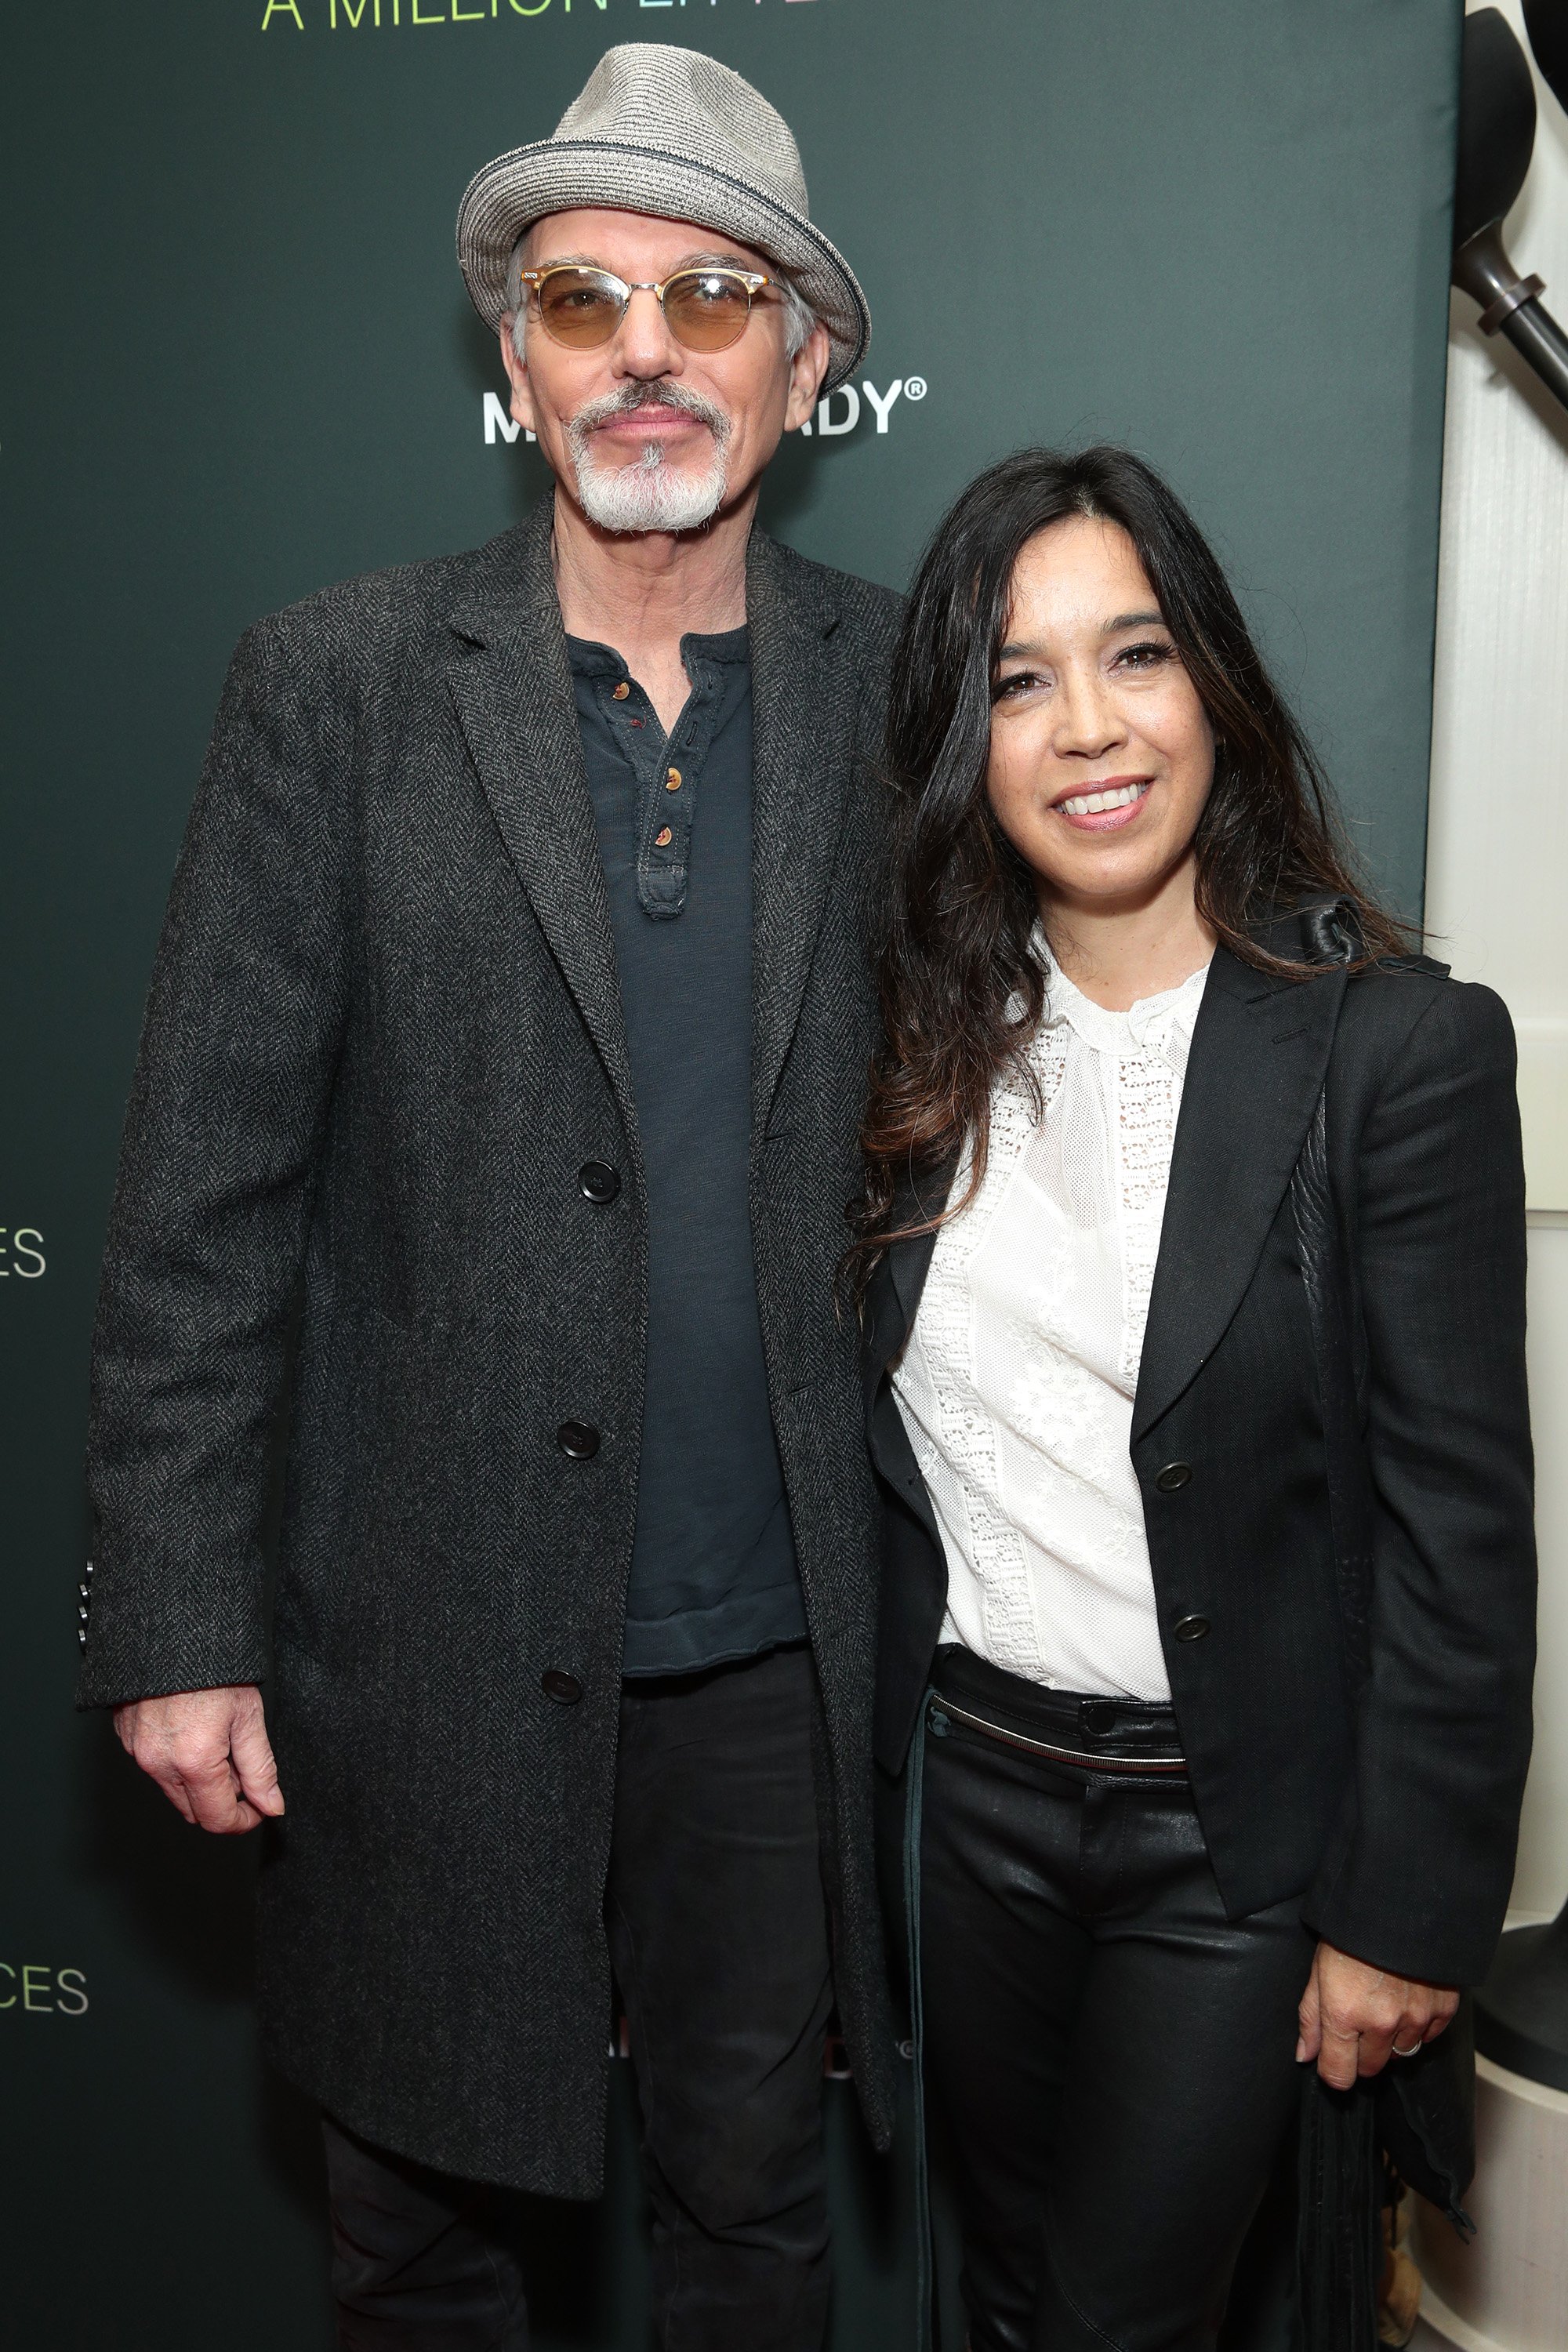 Billy Bob Thornton and Connie Angland at the special screening of "A Million Little Pieces" on December 4, 2019 | Source: Getty Images